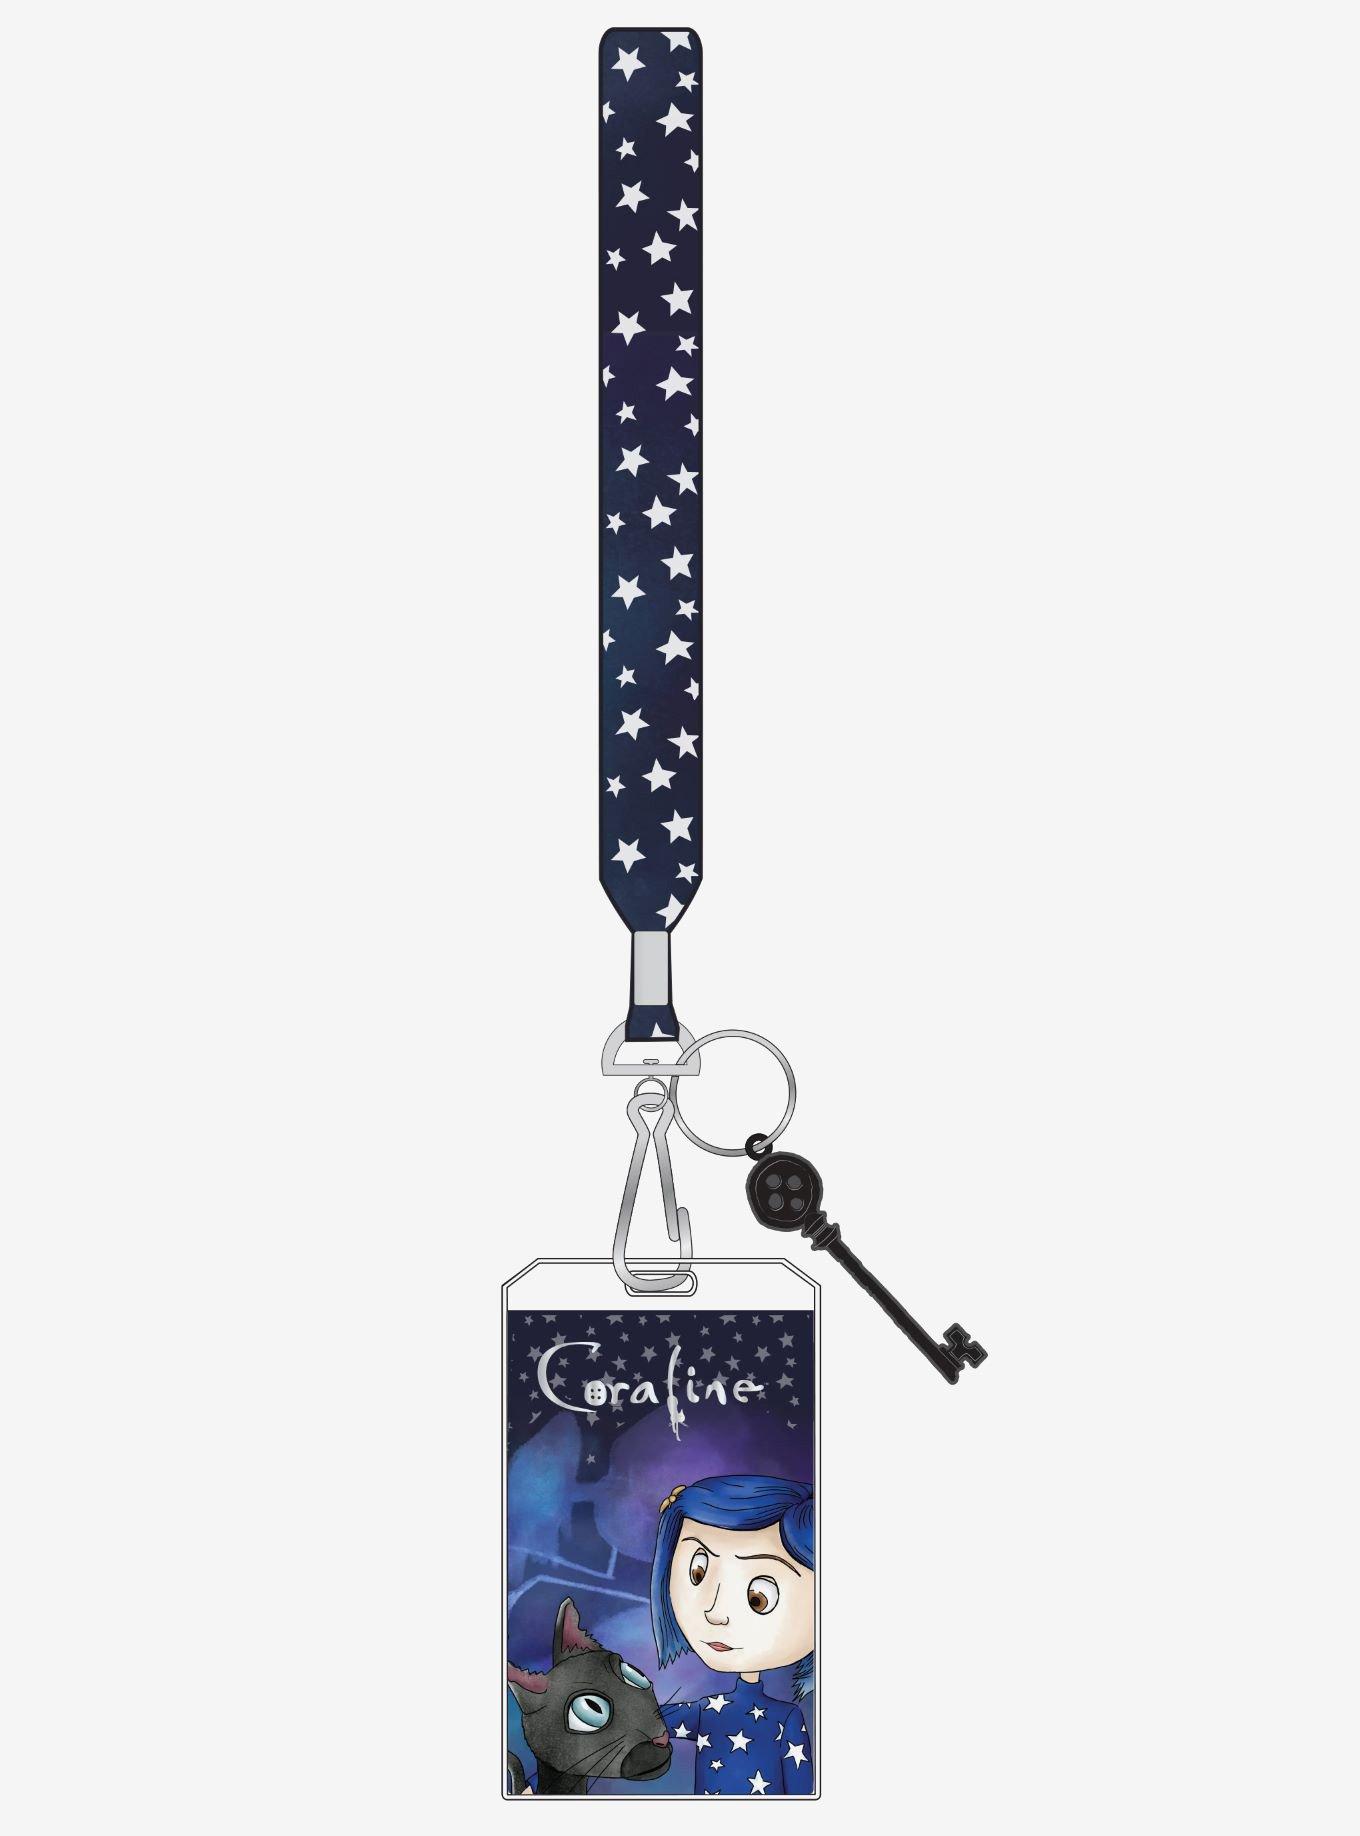 Coraline Button Box with Topper EXCLUSIVE Phone Grip / Keychain